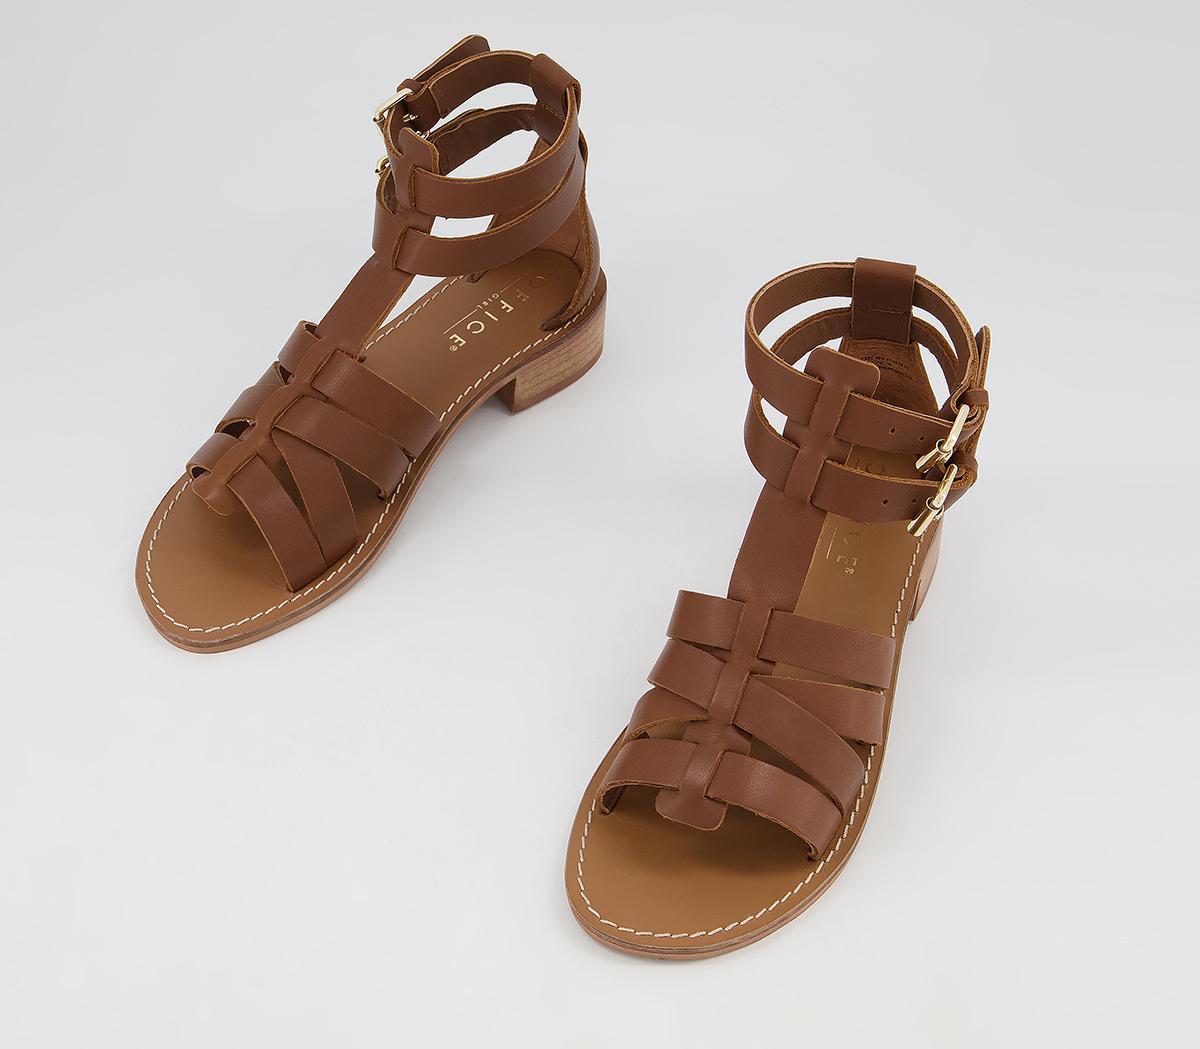 OFFICE Spectrum Buckle Gladiator Sandals Brown Leather - OFFICE Girl